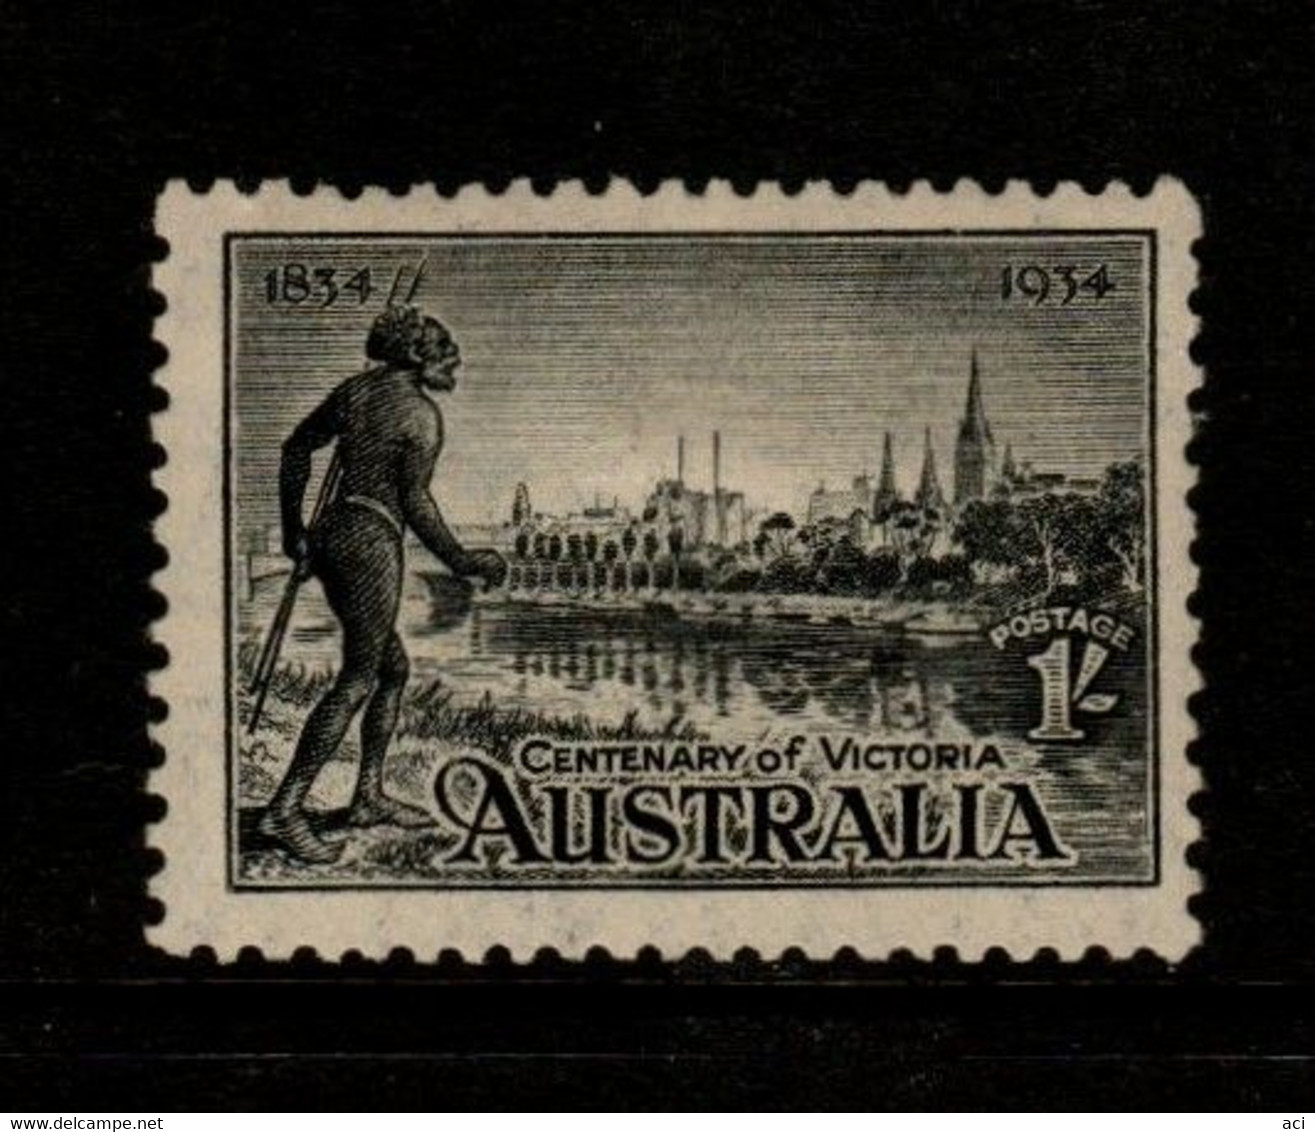 Australia SG 149 1934 Centenary Of Victoria One Shilling Perf 10.5 Mint Hinged, - Mint Stamps